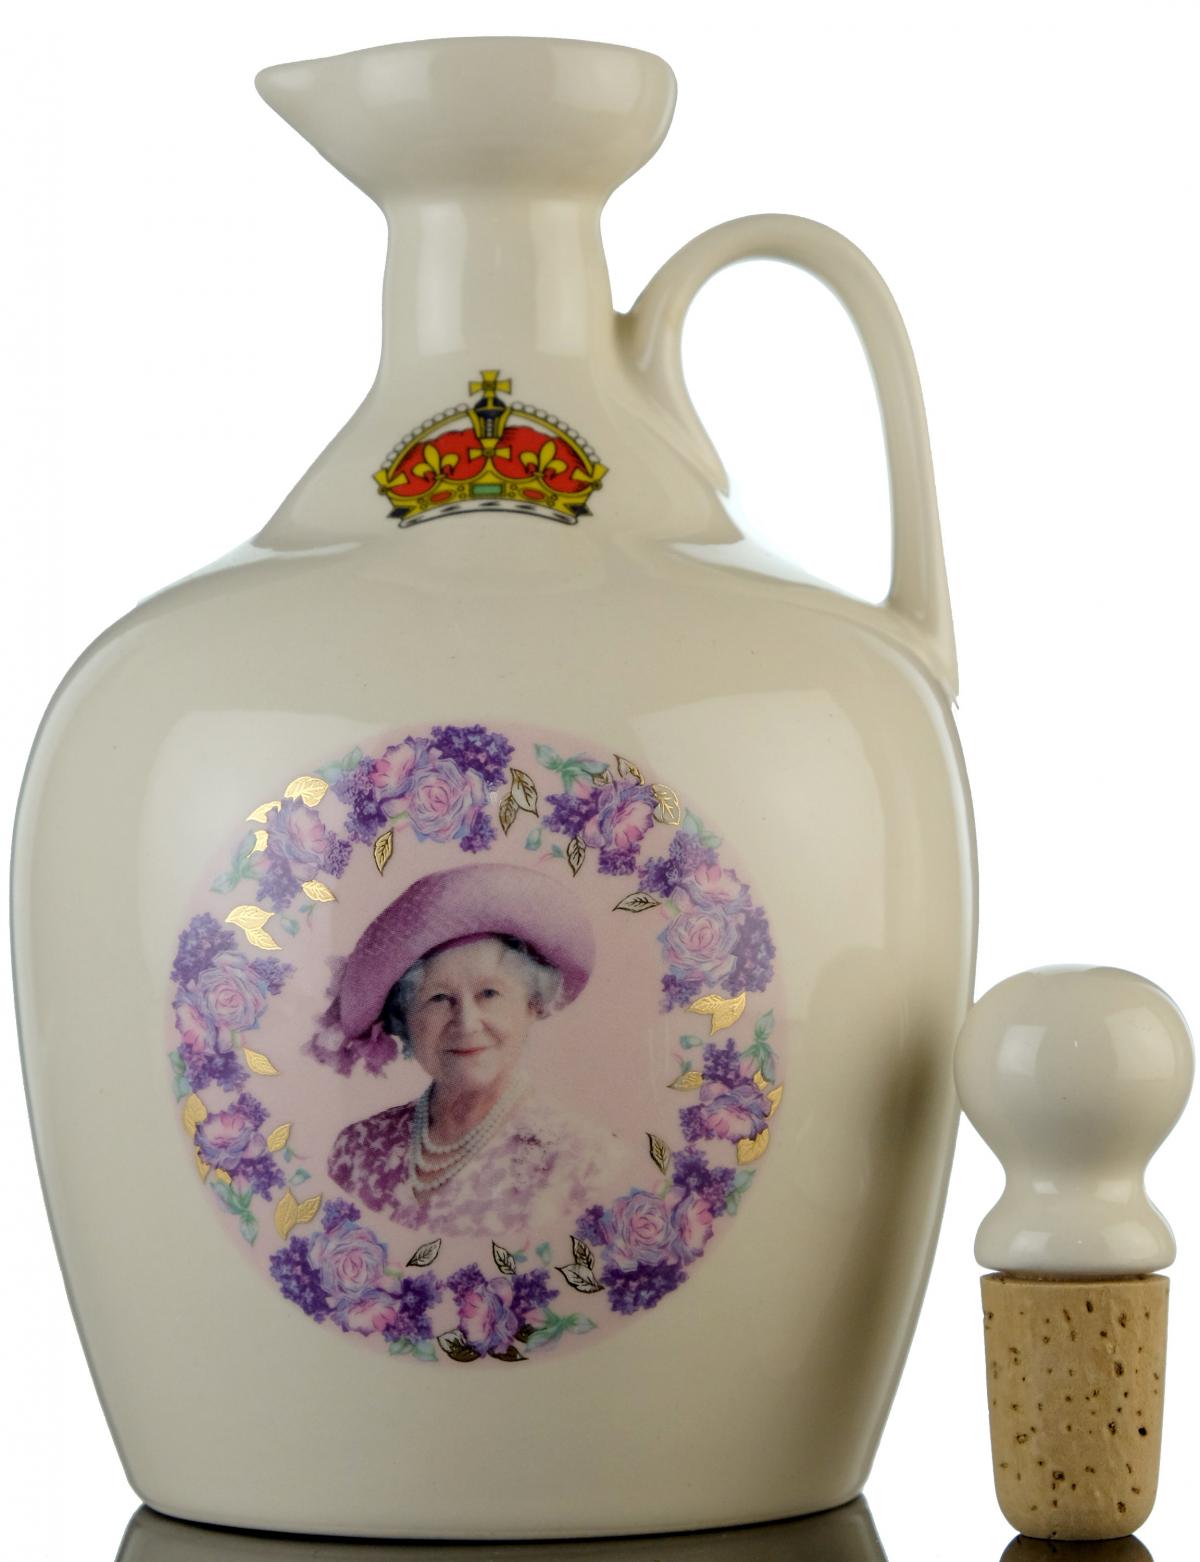 Rutherfords Ceramic - To Commemorate The Life Of Queen Elizabeth The Queen Mother